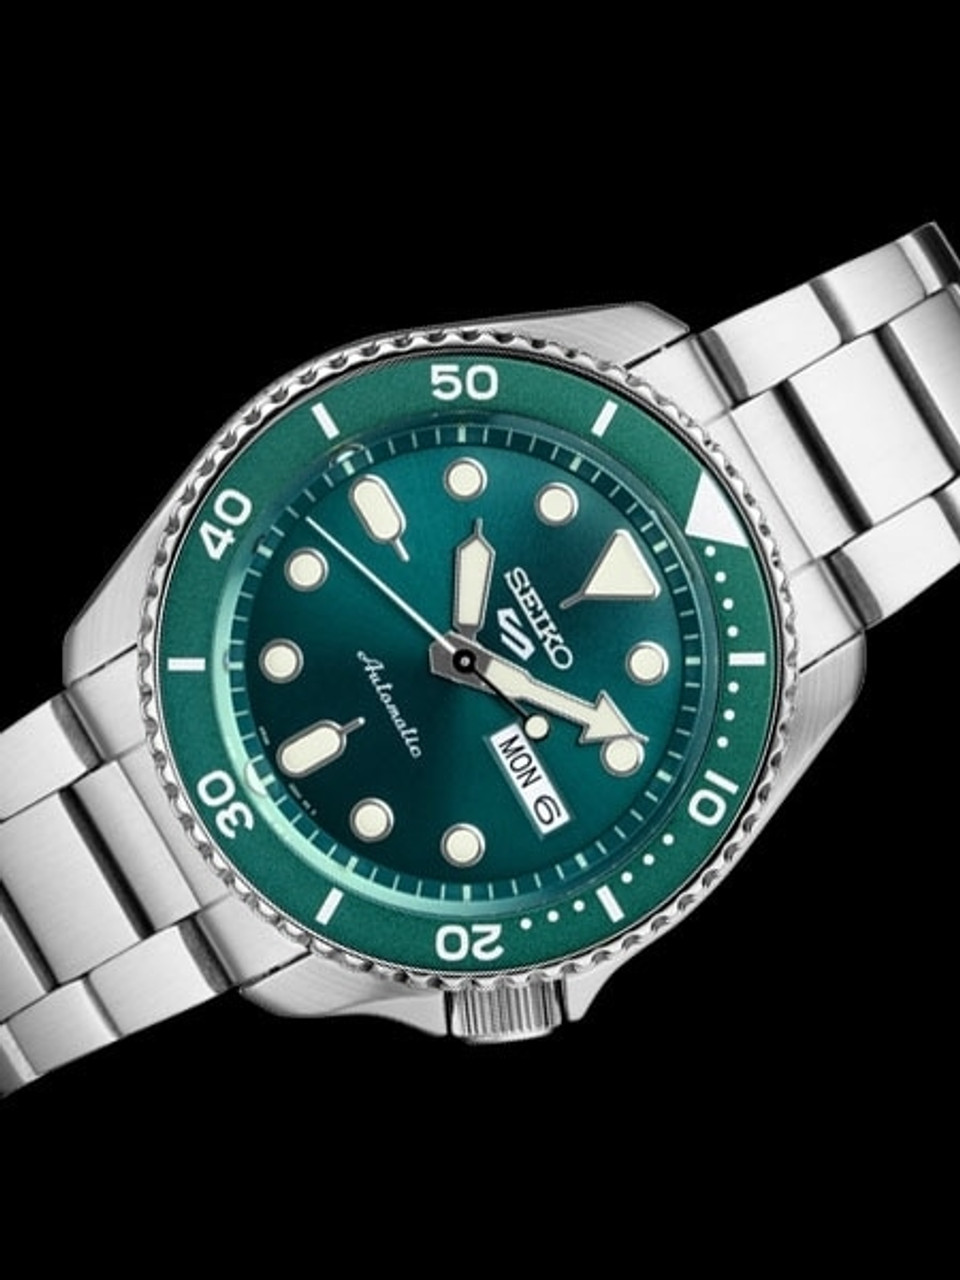 Seiko 5 Sports Automatic 24-Jewel Watch with Green Dial #SRPD61